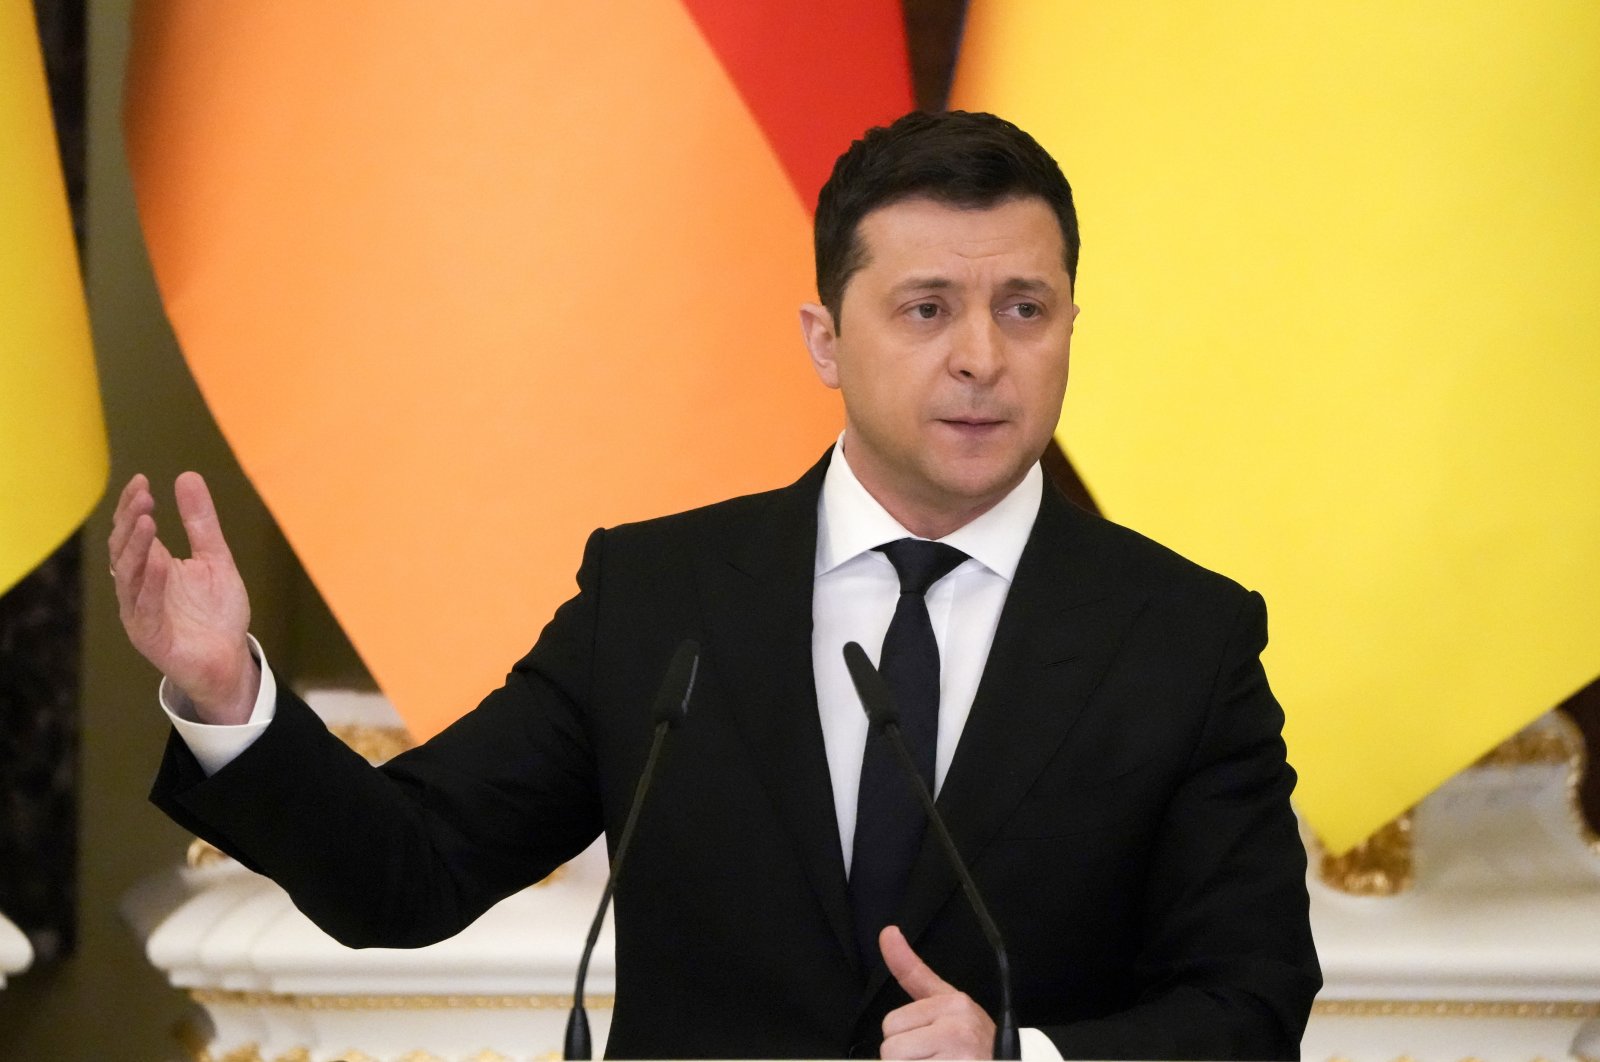 Ukrainian President Volodymyr Zelenskyy gestures during joint news conference with German Chancellor Olaf Scholz following the talks at The Mariinskyi Palace in Kyiv, Ukraine, Feb. 14, 2022. (AP Photo)